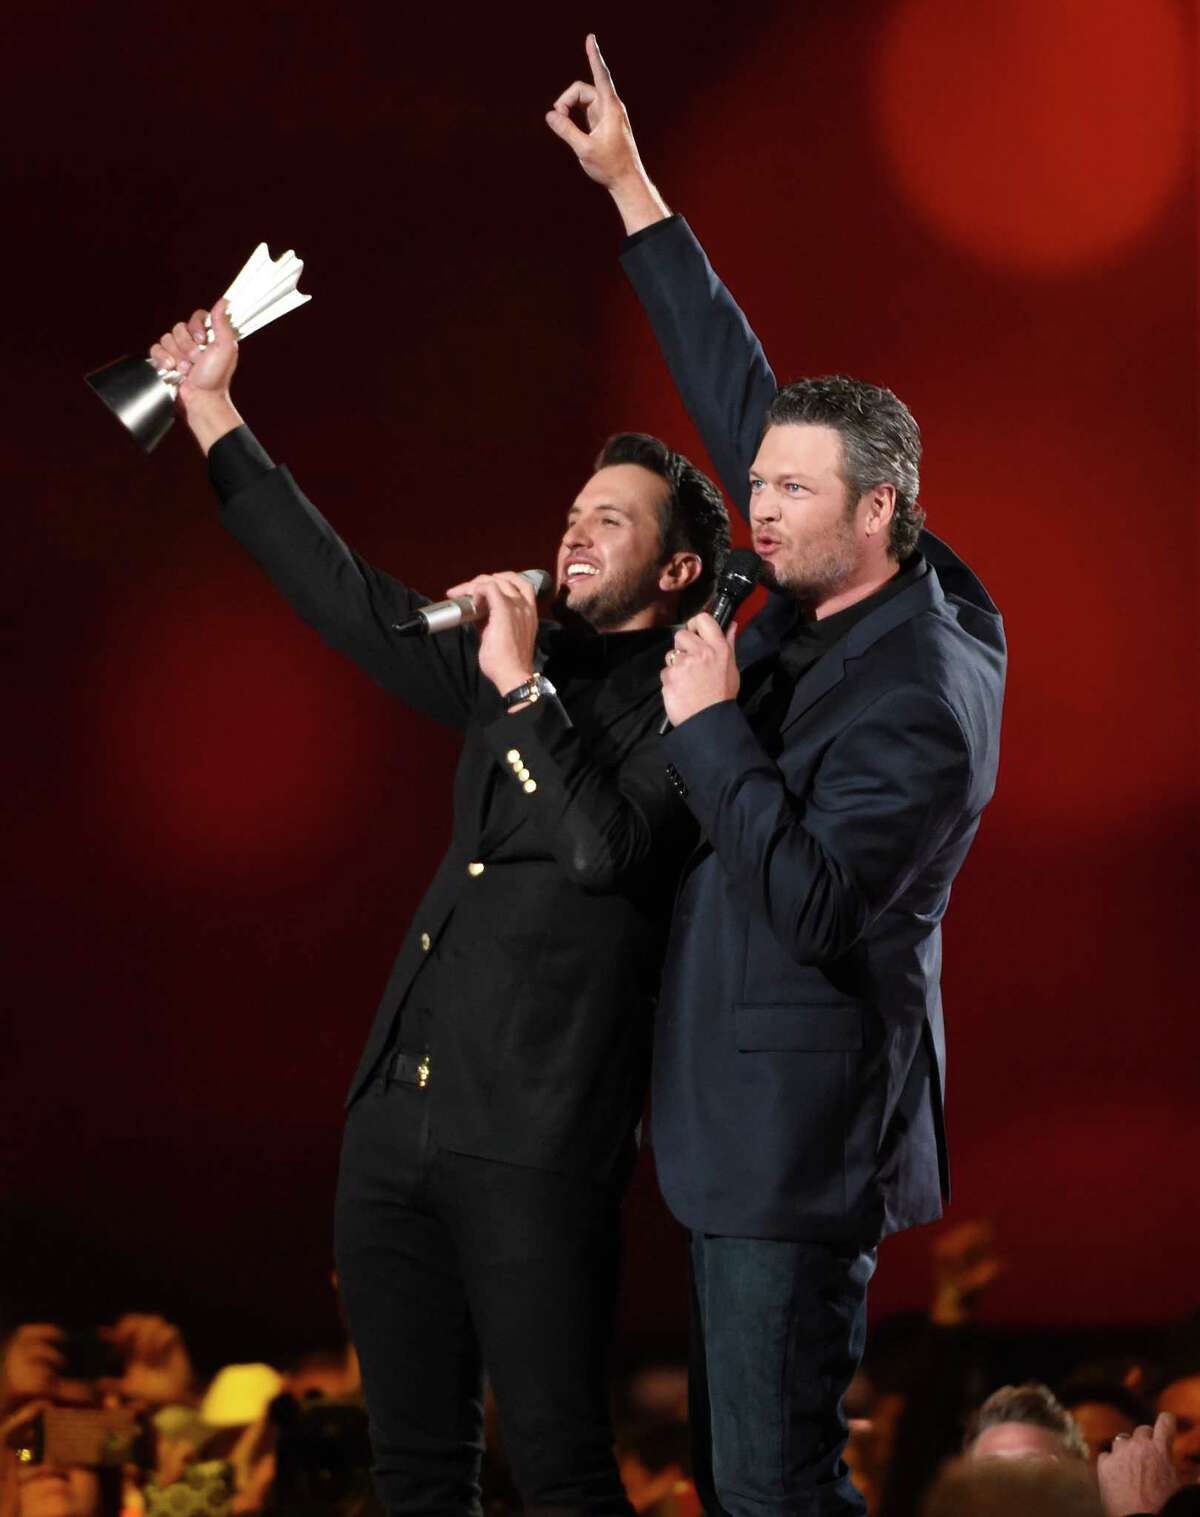 Luke Bryan, left, and Blake Shelton speak on stage after Bryan accepts the award for entertainer of the year at the 50th annual Academy of Country Music Awards at AT&T Stadium on Sunday, April 19, 2015, in Arlington, Texas. (Photo by Chris Pizzello/Invision/AP) ORG XMIT: TXBR352